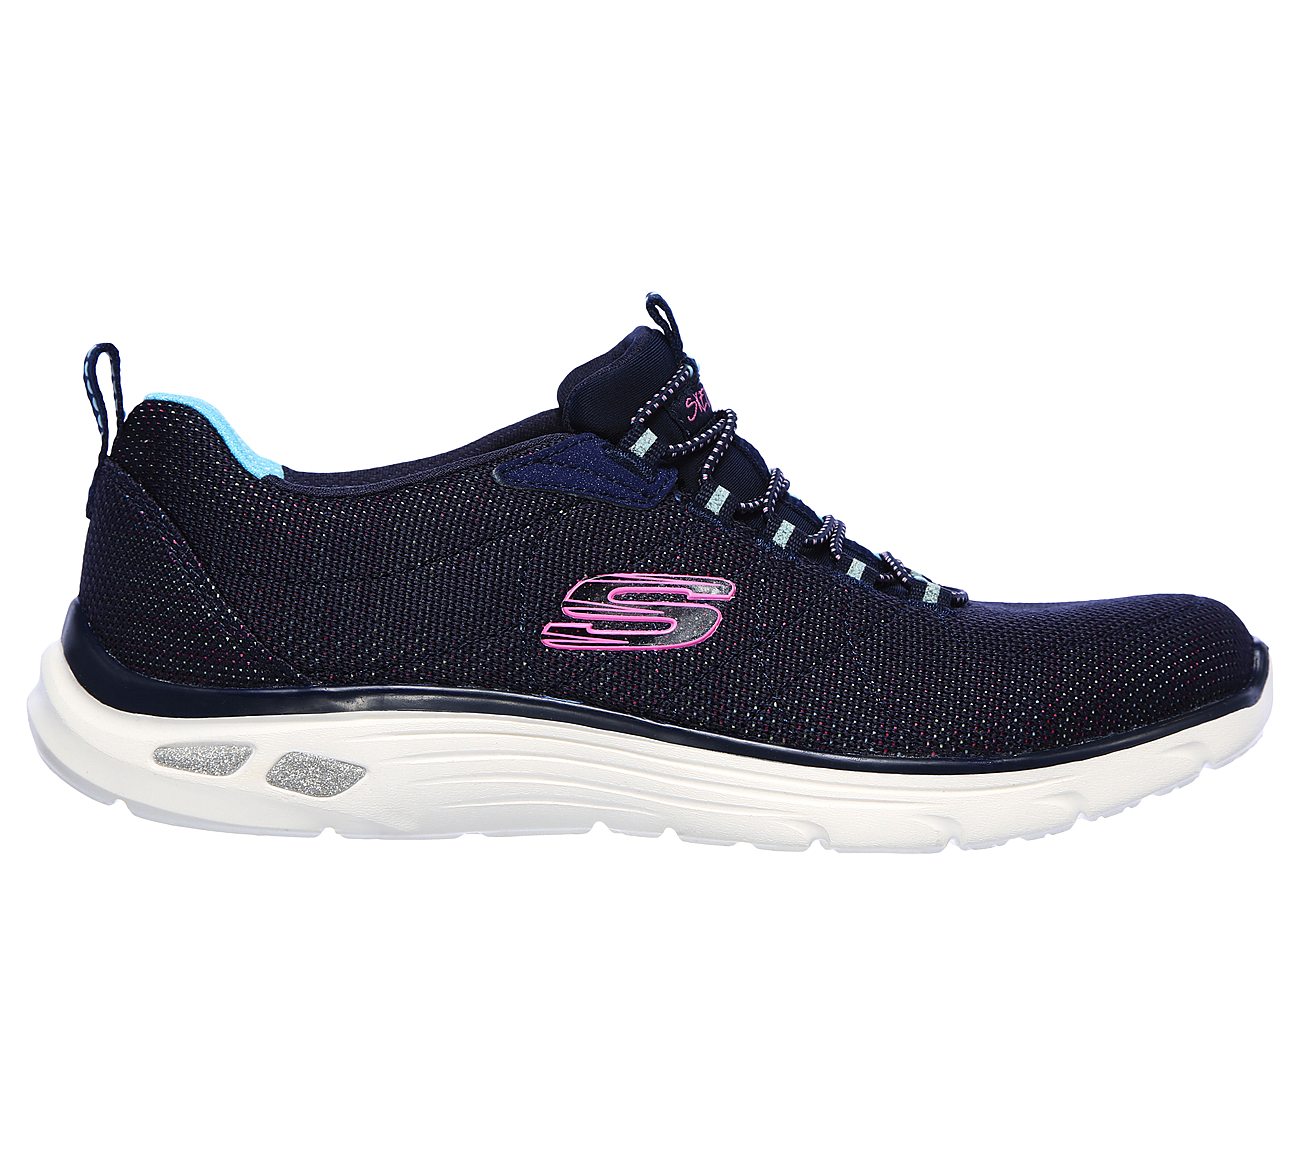 Buy SKECHERS Relaxed Fit: Empire D'Lux - Dance Party Sport Shoes